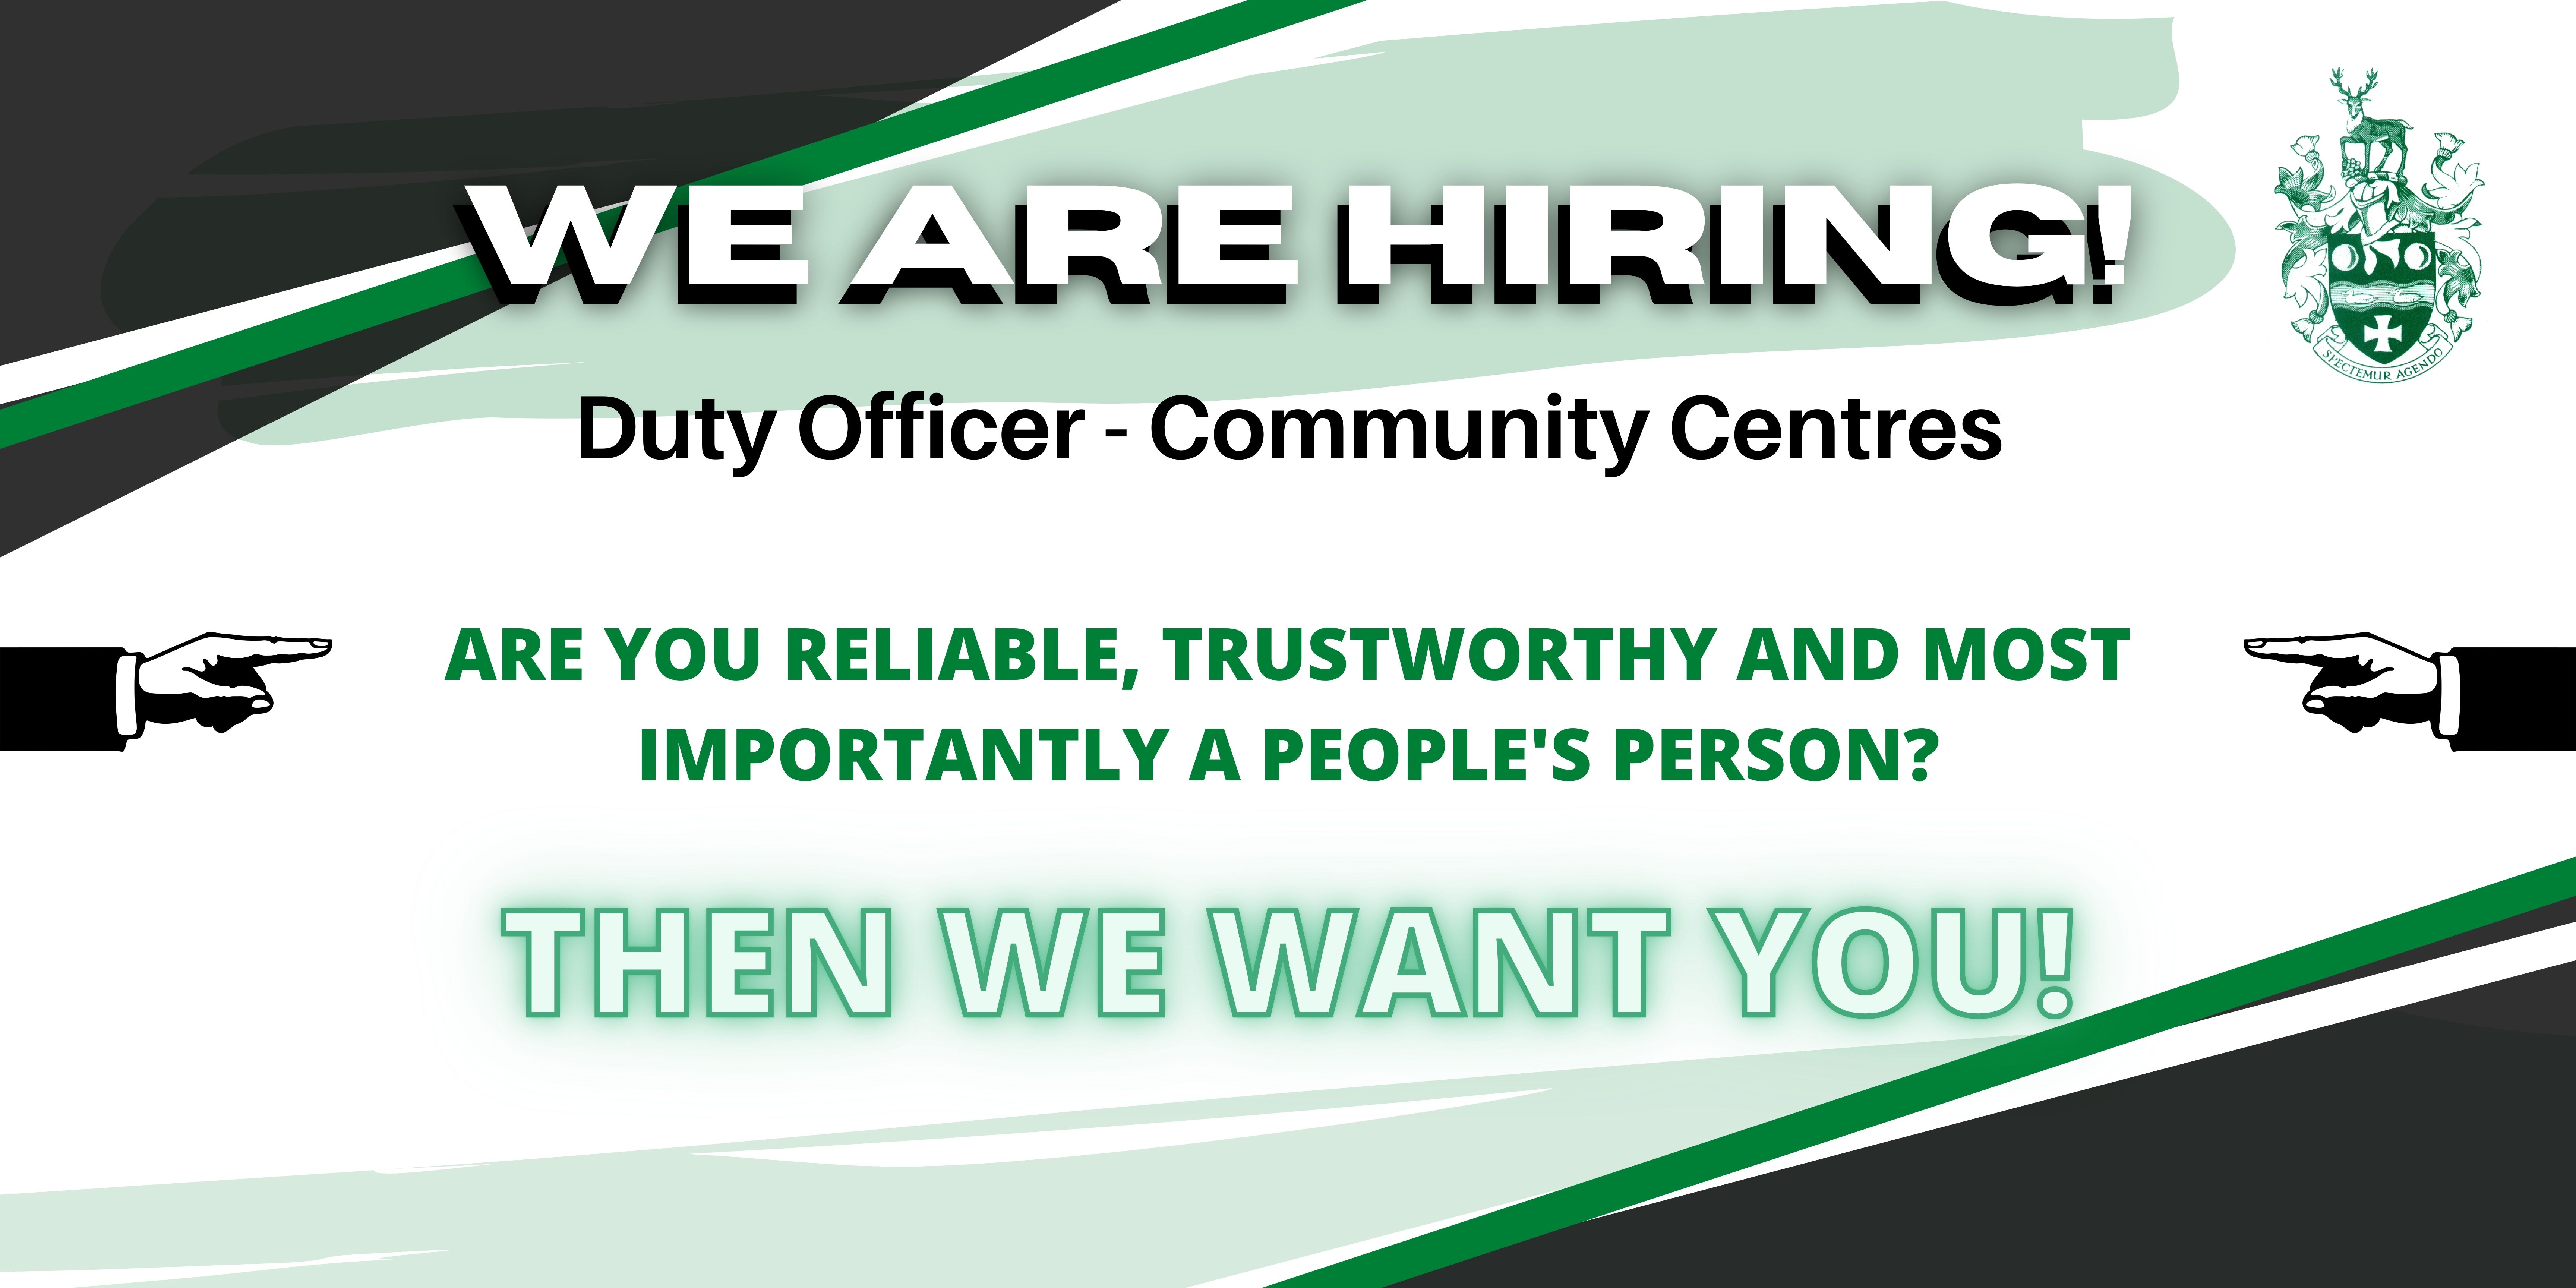 We are Hiring! - Duty Officer